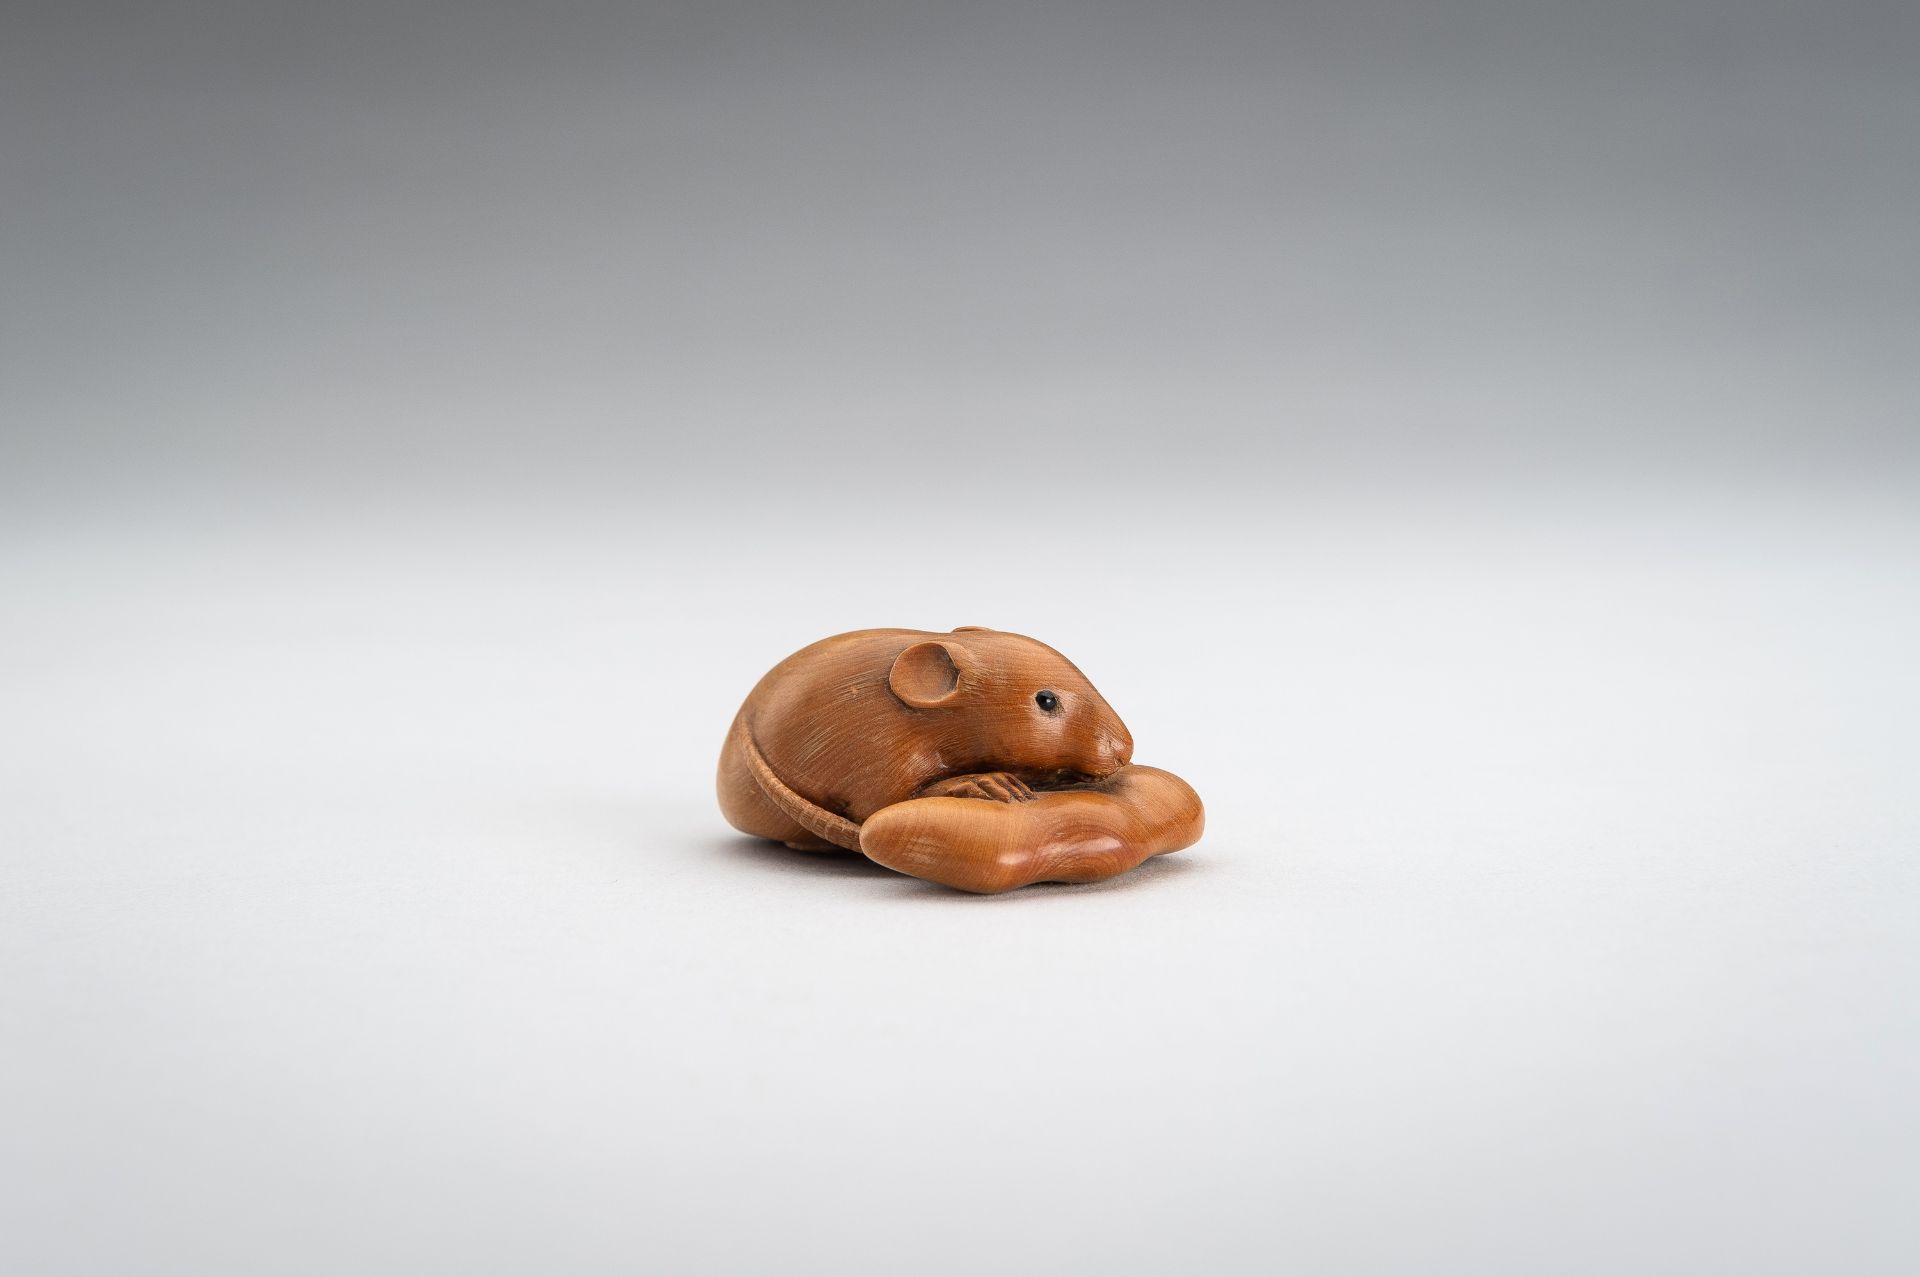 A WOOD NETSUKE OF A RAT WITH EDAMAME BEAN POD - Image 7 of 12